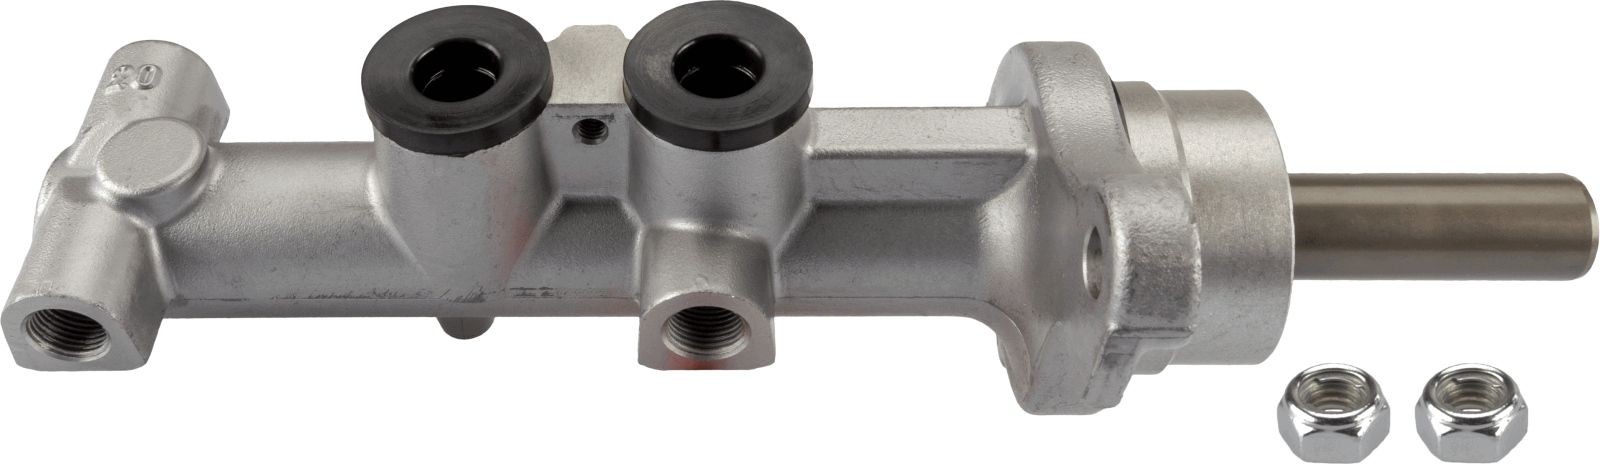 TRW PMF562 Brake master cylinder RENAULT experience and price